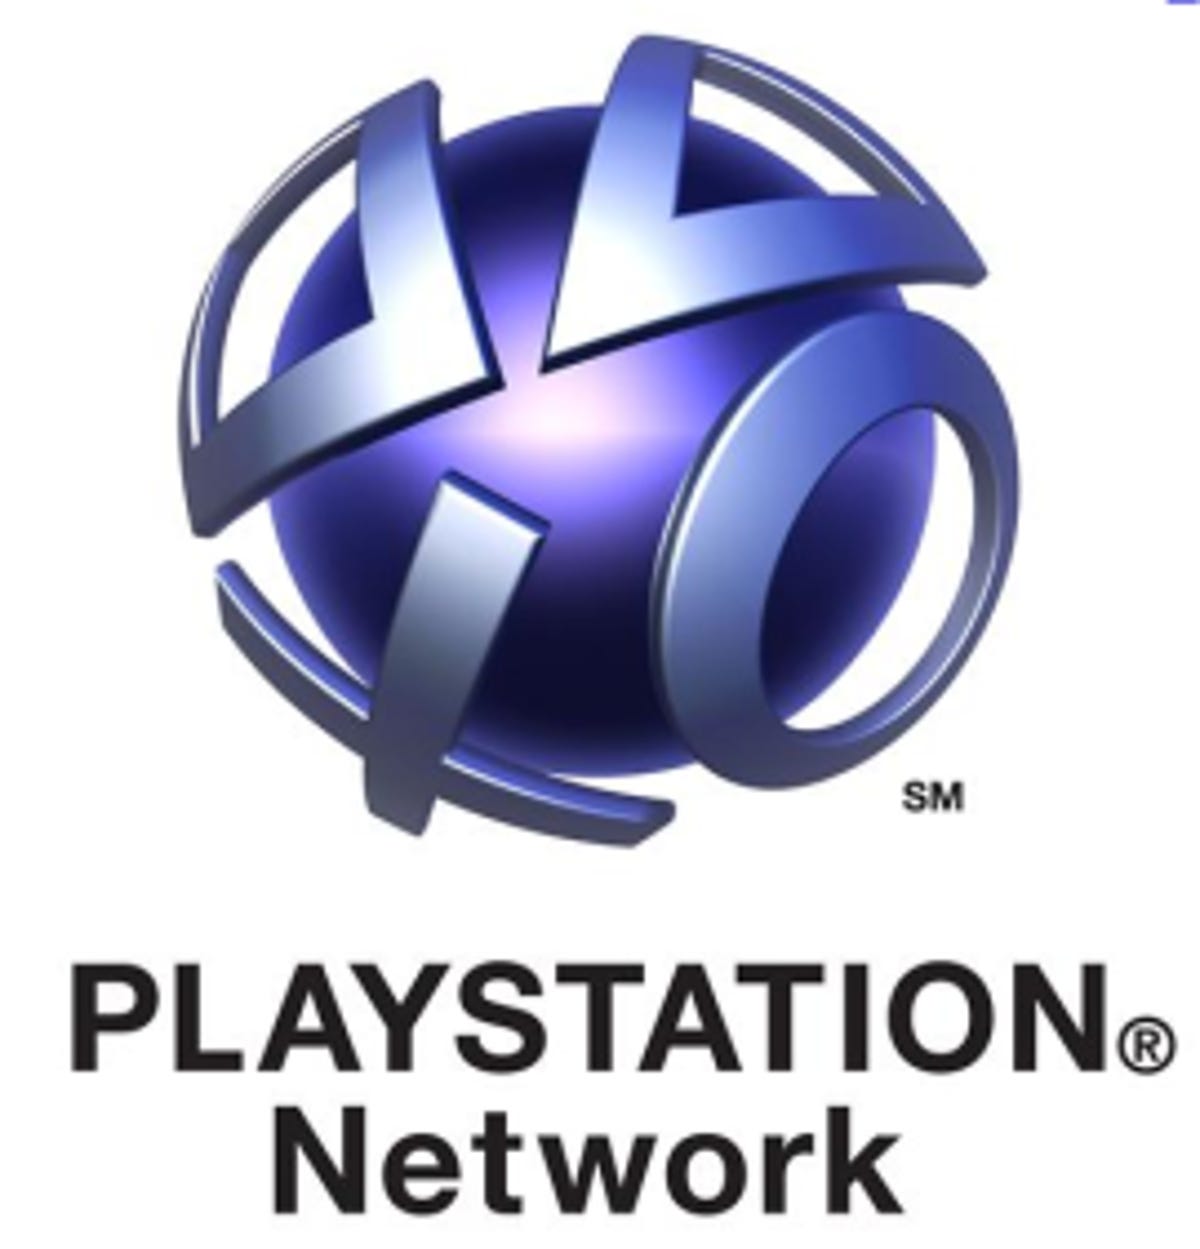 sonypsn270x281.png